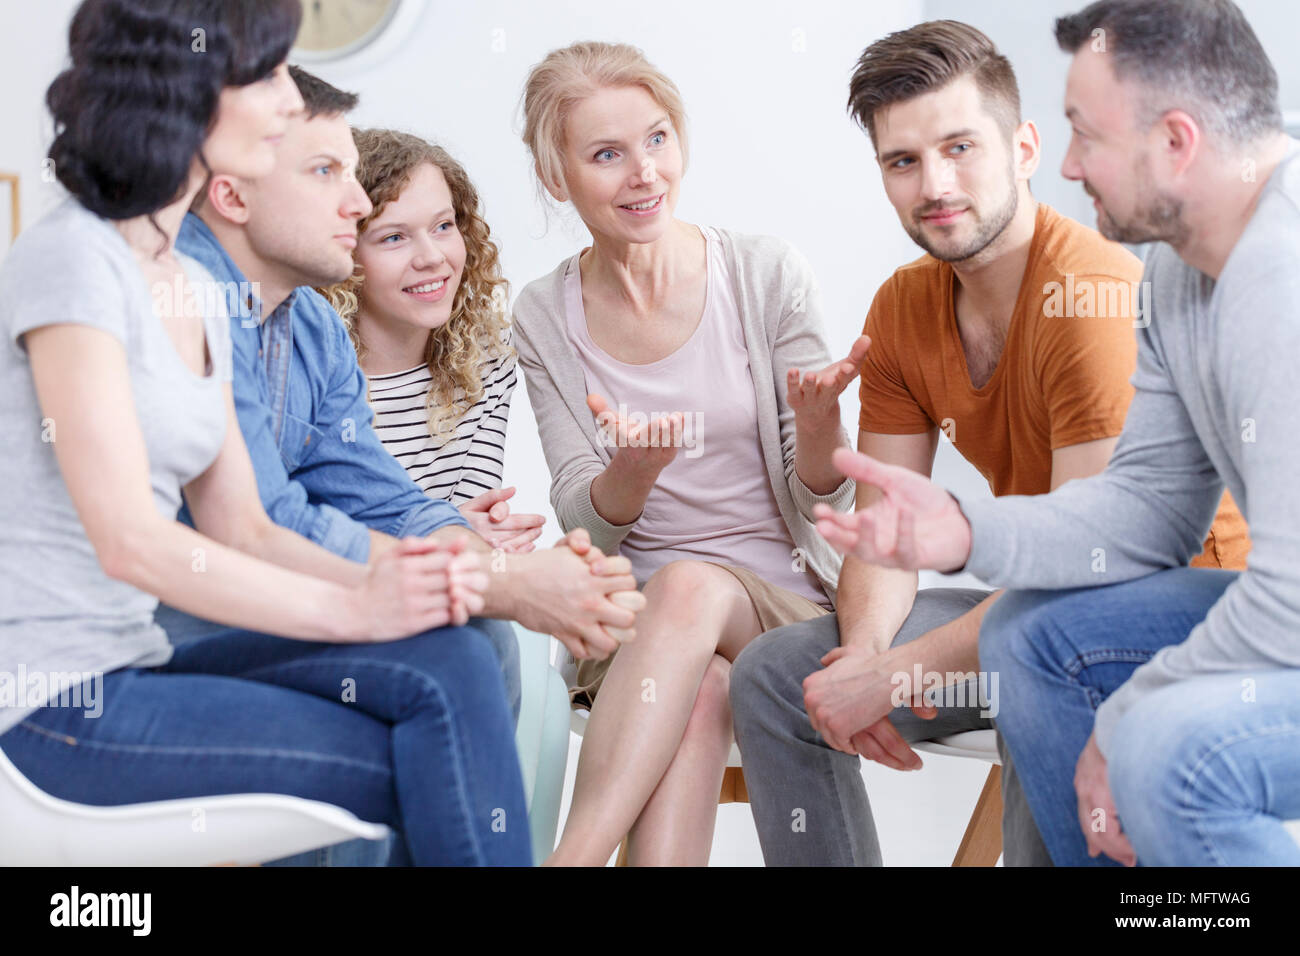 Group of people sitting in a circle, showing support to a man fighting alcohol addiction Stock Photo